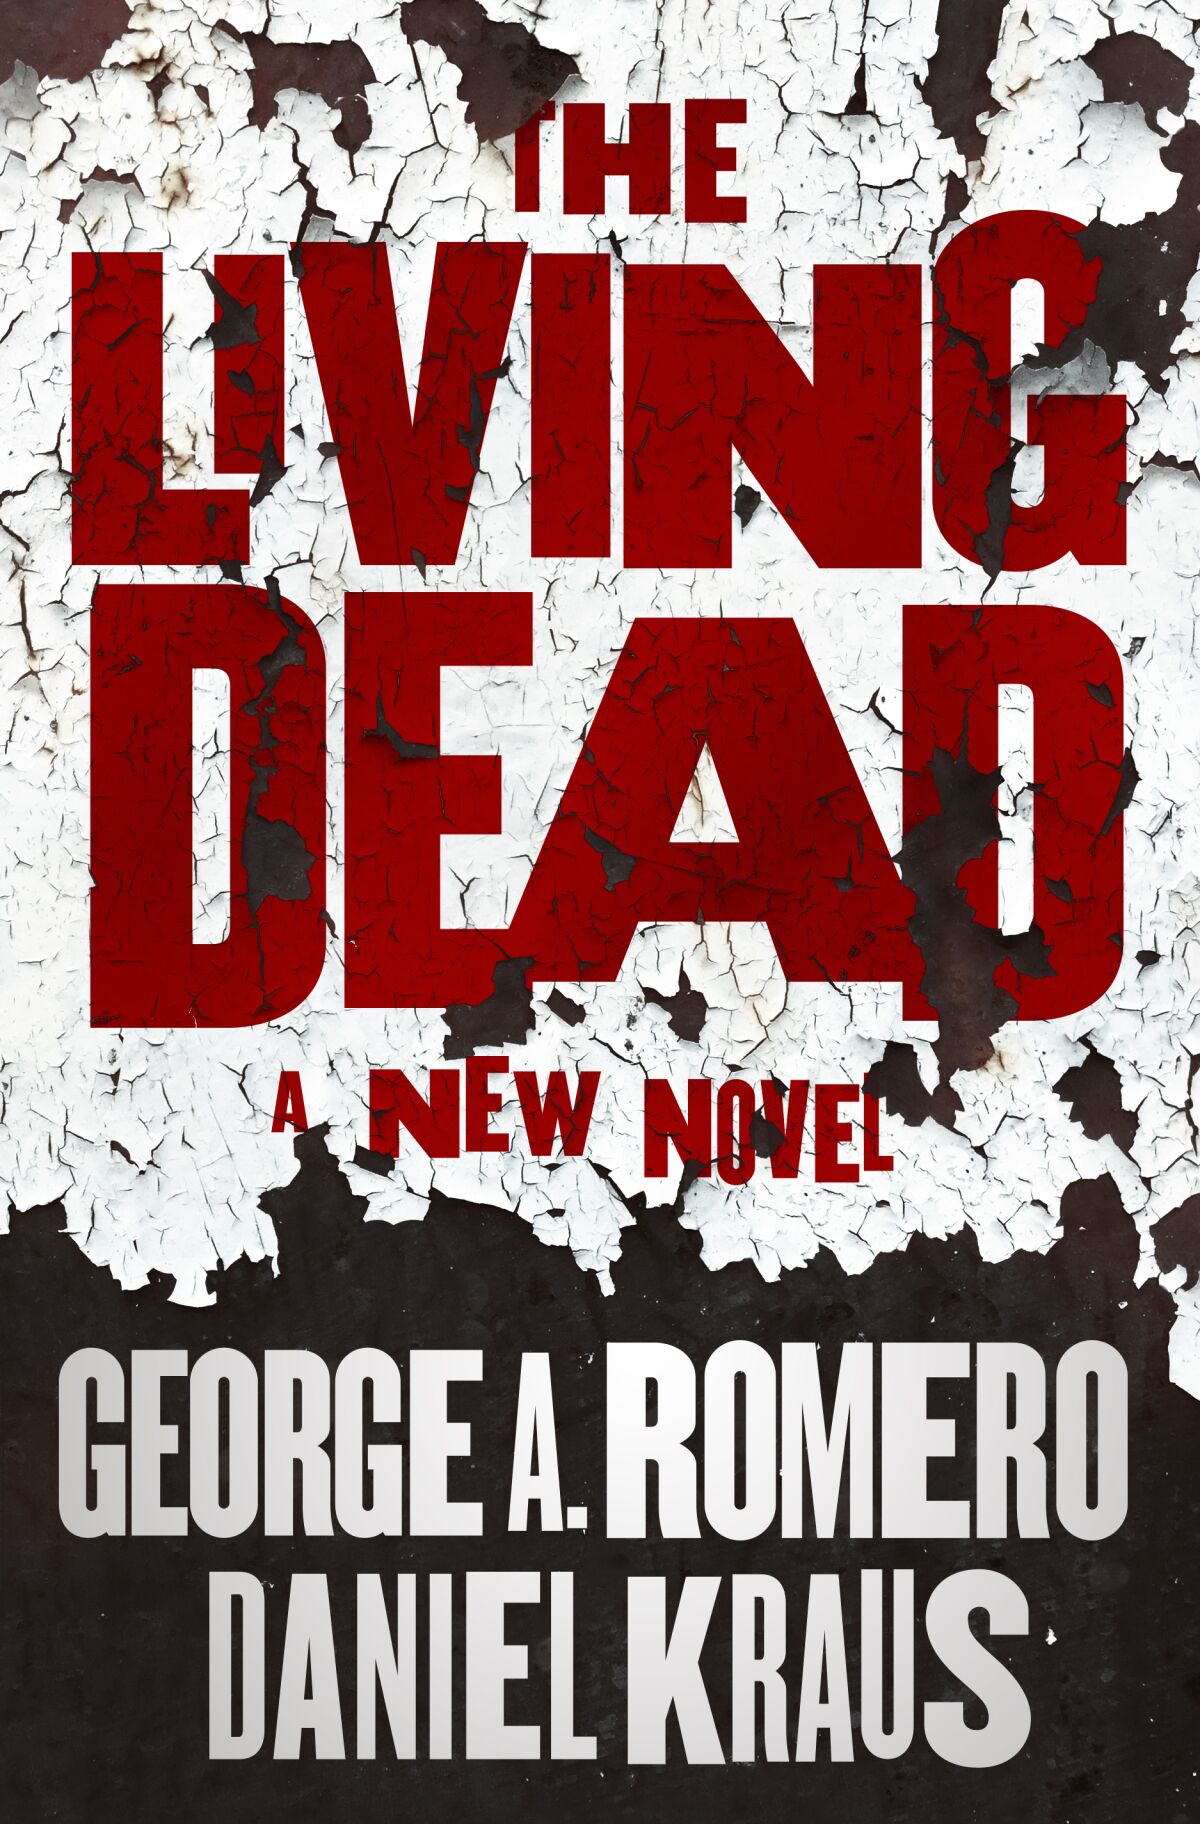 Book jacket for "The Living Dead" by the late George Romero and Daniel Kraus.